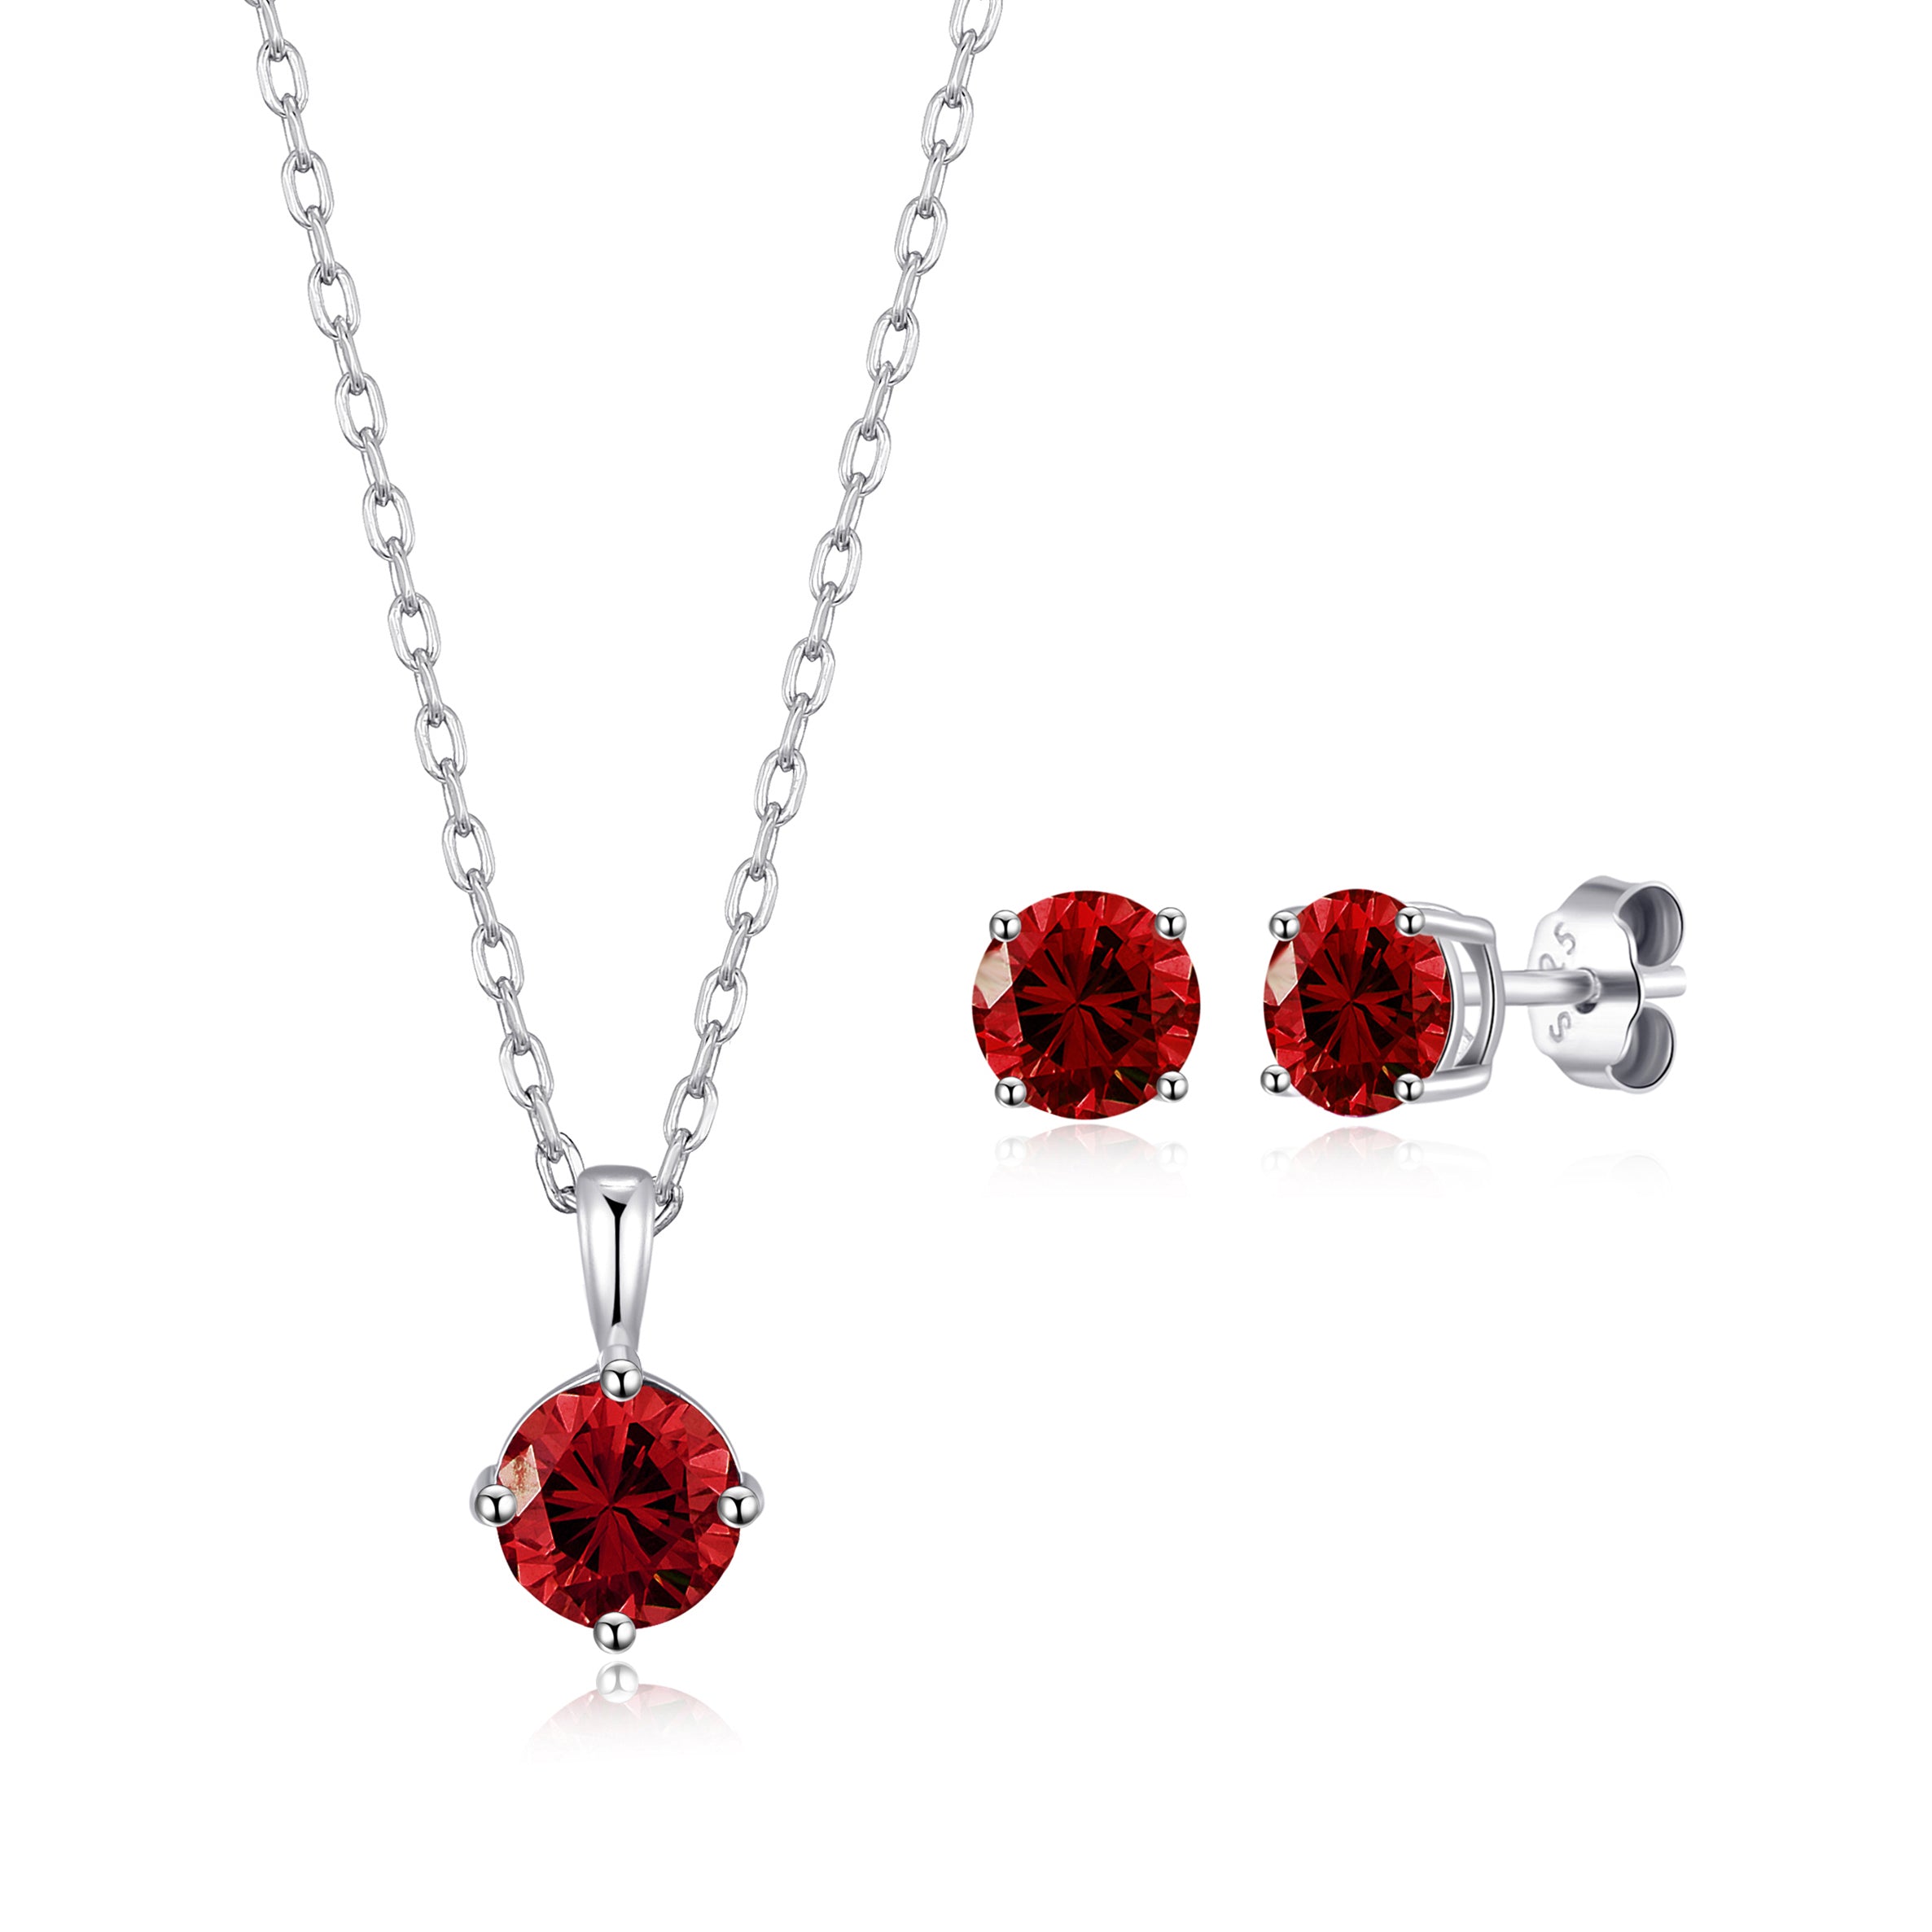 Sterling Silver January (Garnet) Birthstone Necklace & Earrings Set Created with Zircondia® Crystals by Philip Jones Jewellery